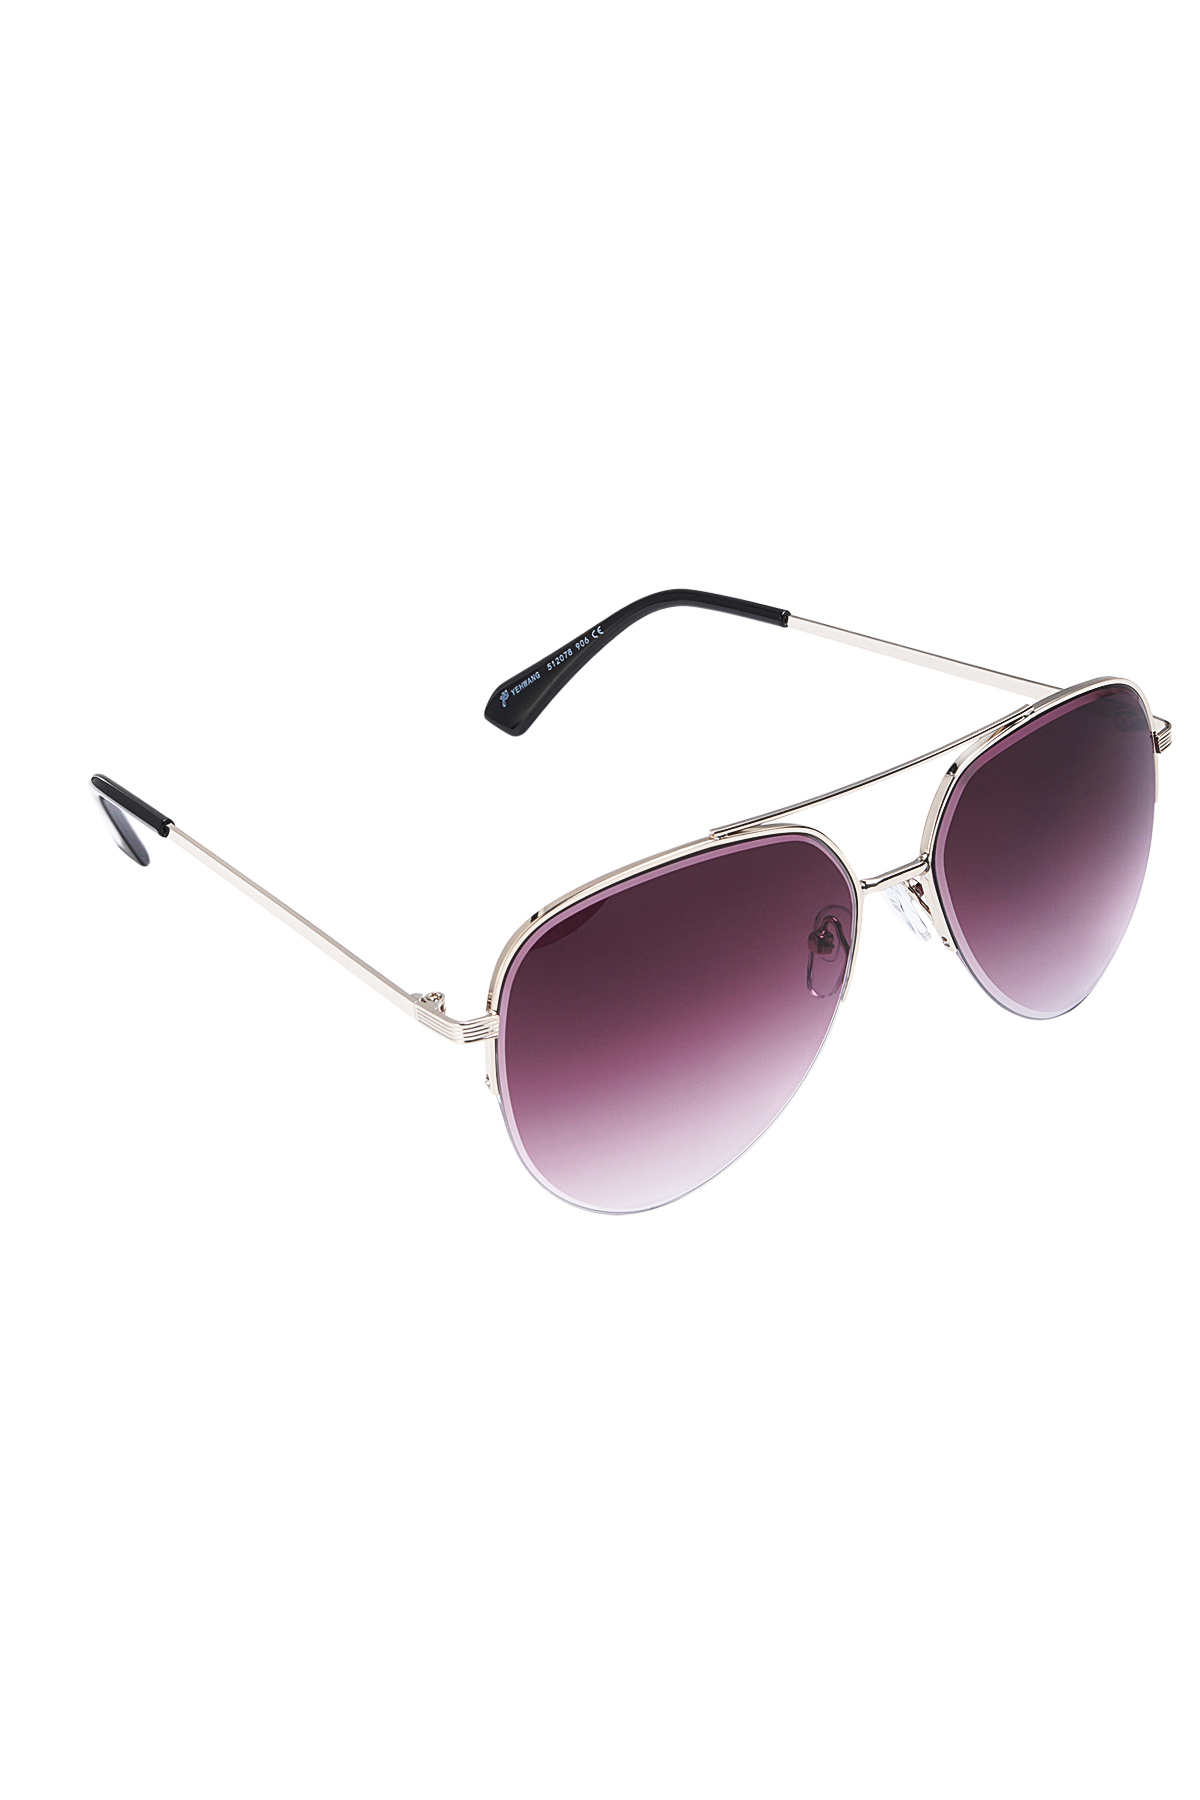 Zonnebril aviator style - paars